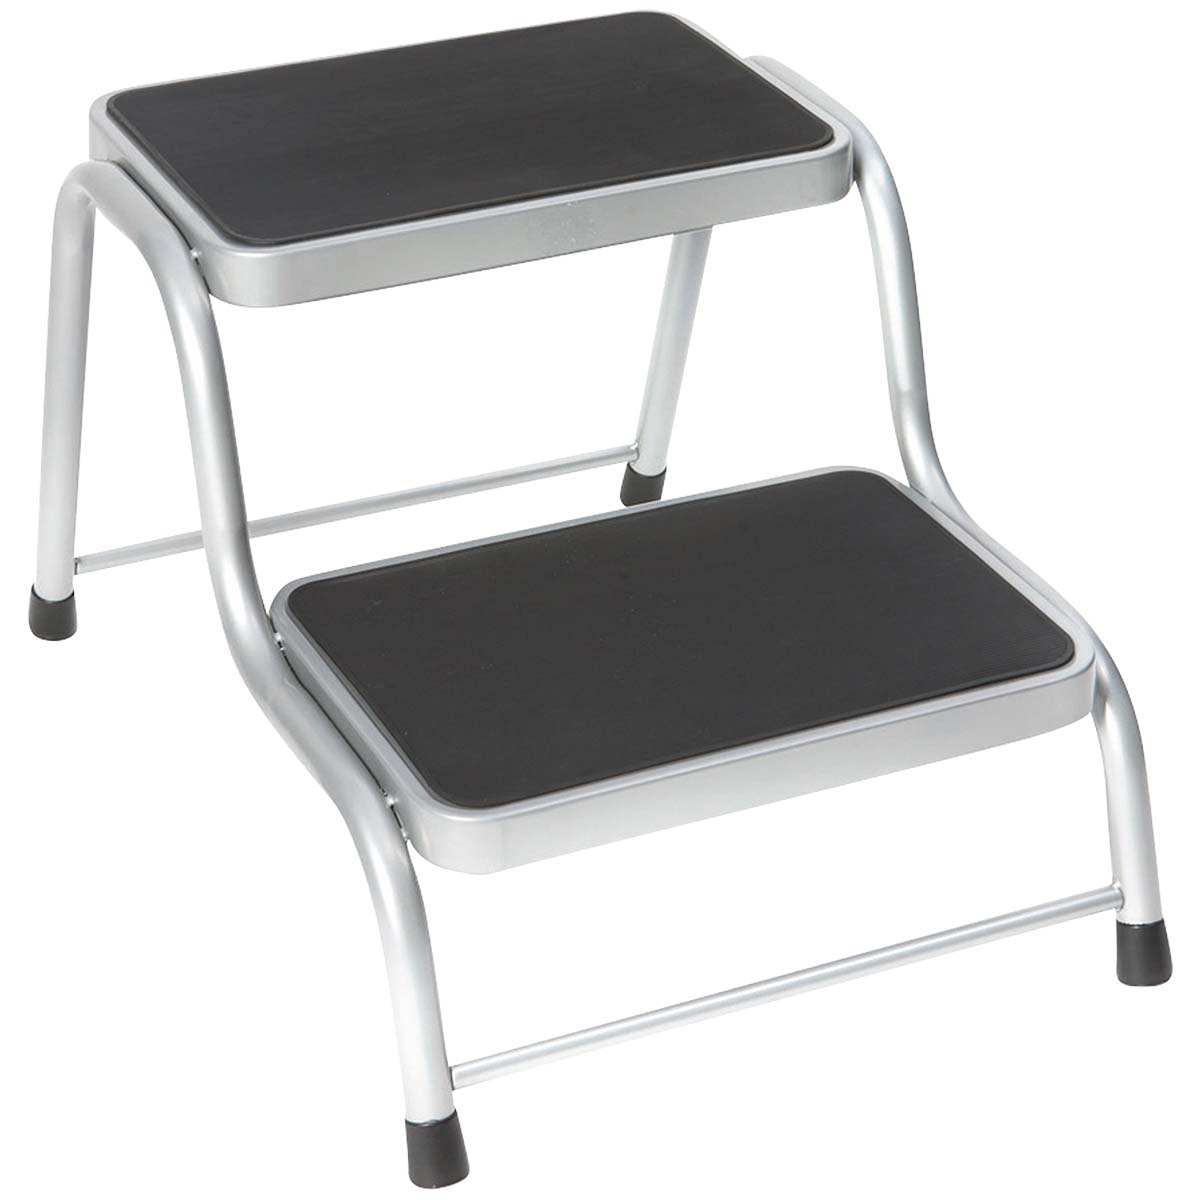 5314998 Extra sturdy step with double steps. With a steel frame with non-slip coating. The width of the step is 37 cm. Maximum load: 150 kilogram.